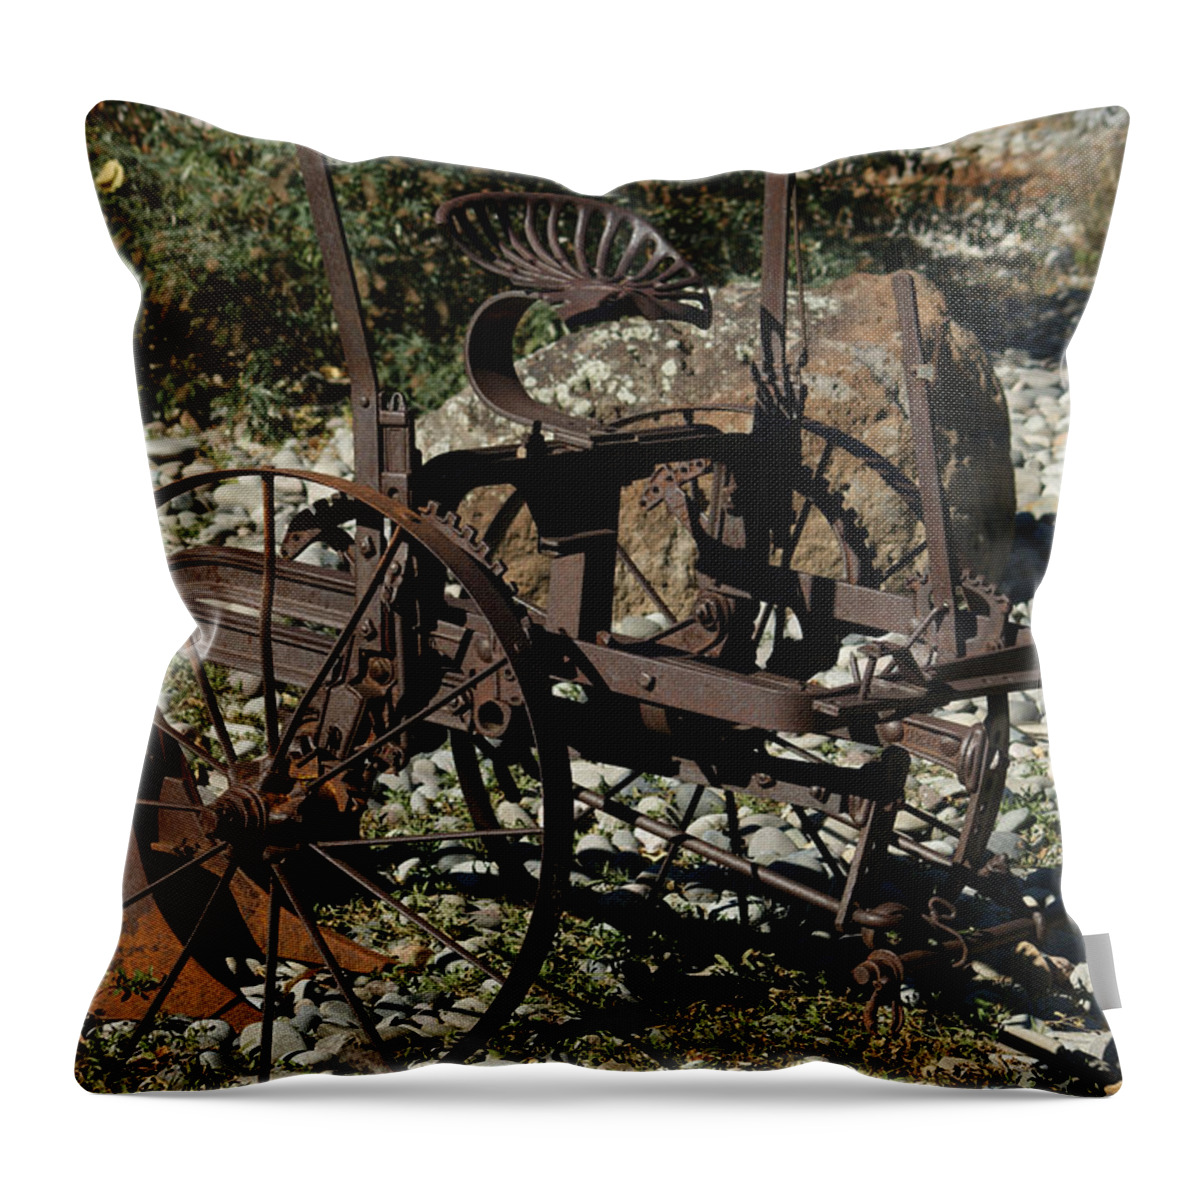 Plow Throw Pillow featuring the photograph Old Plow 2 by Ernest Echols